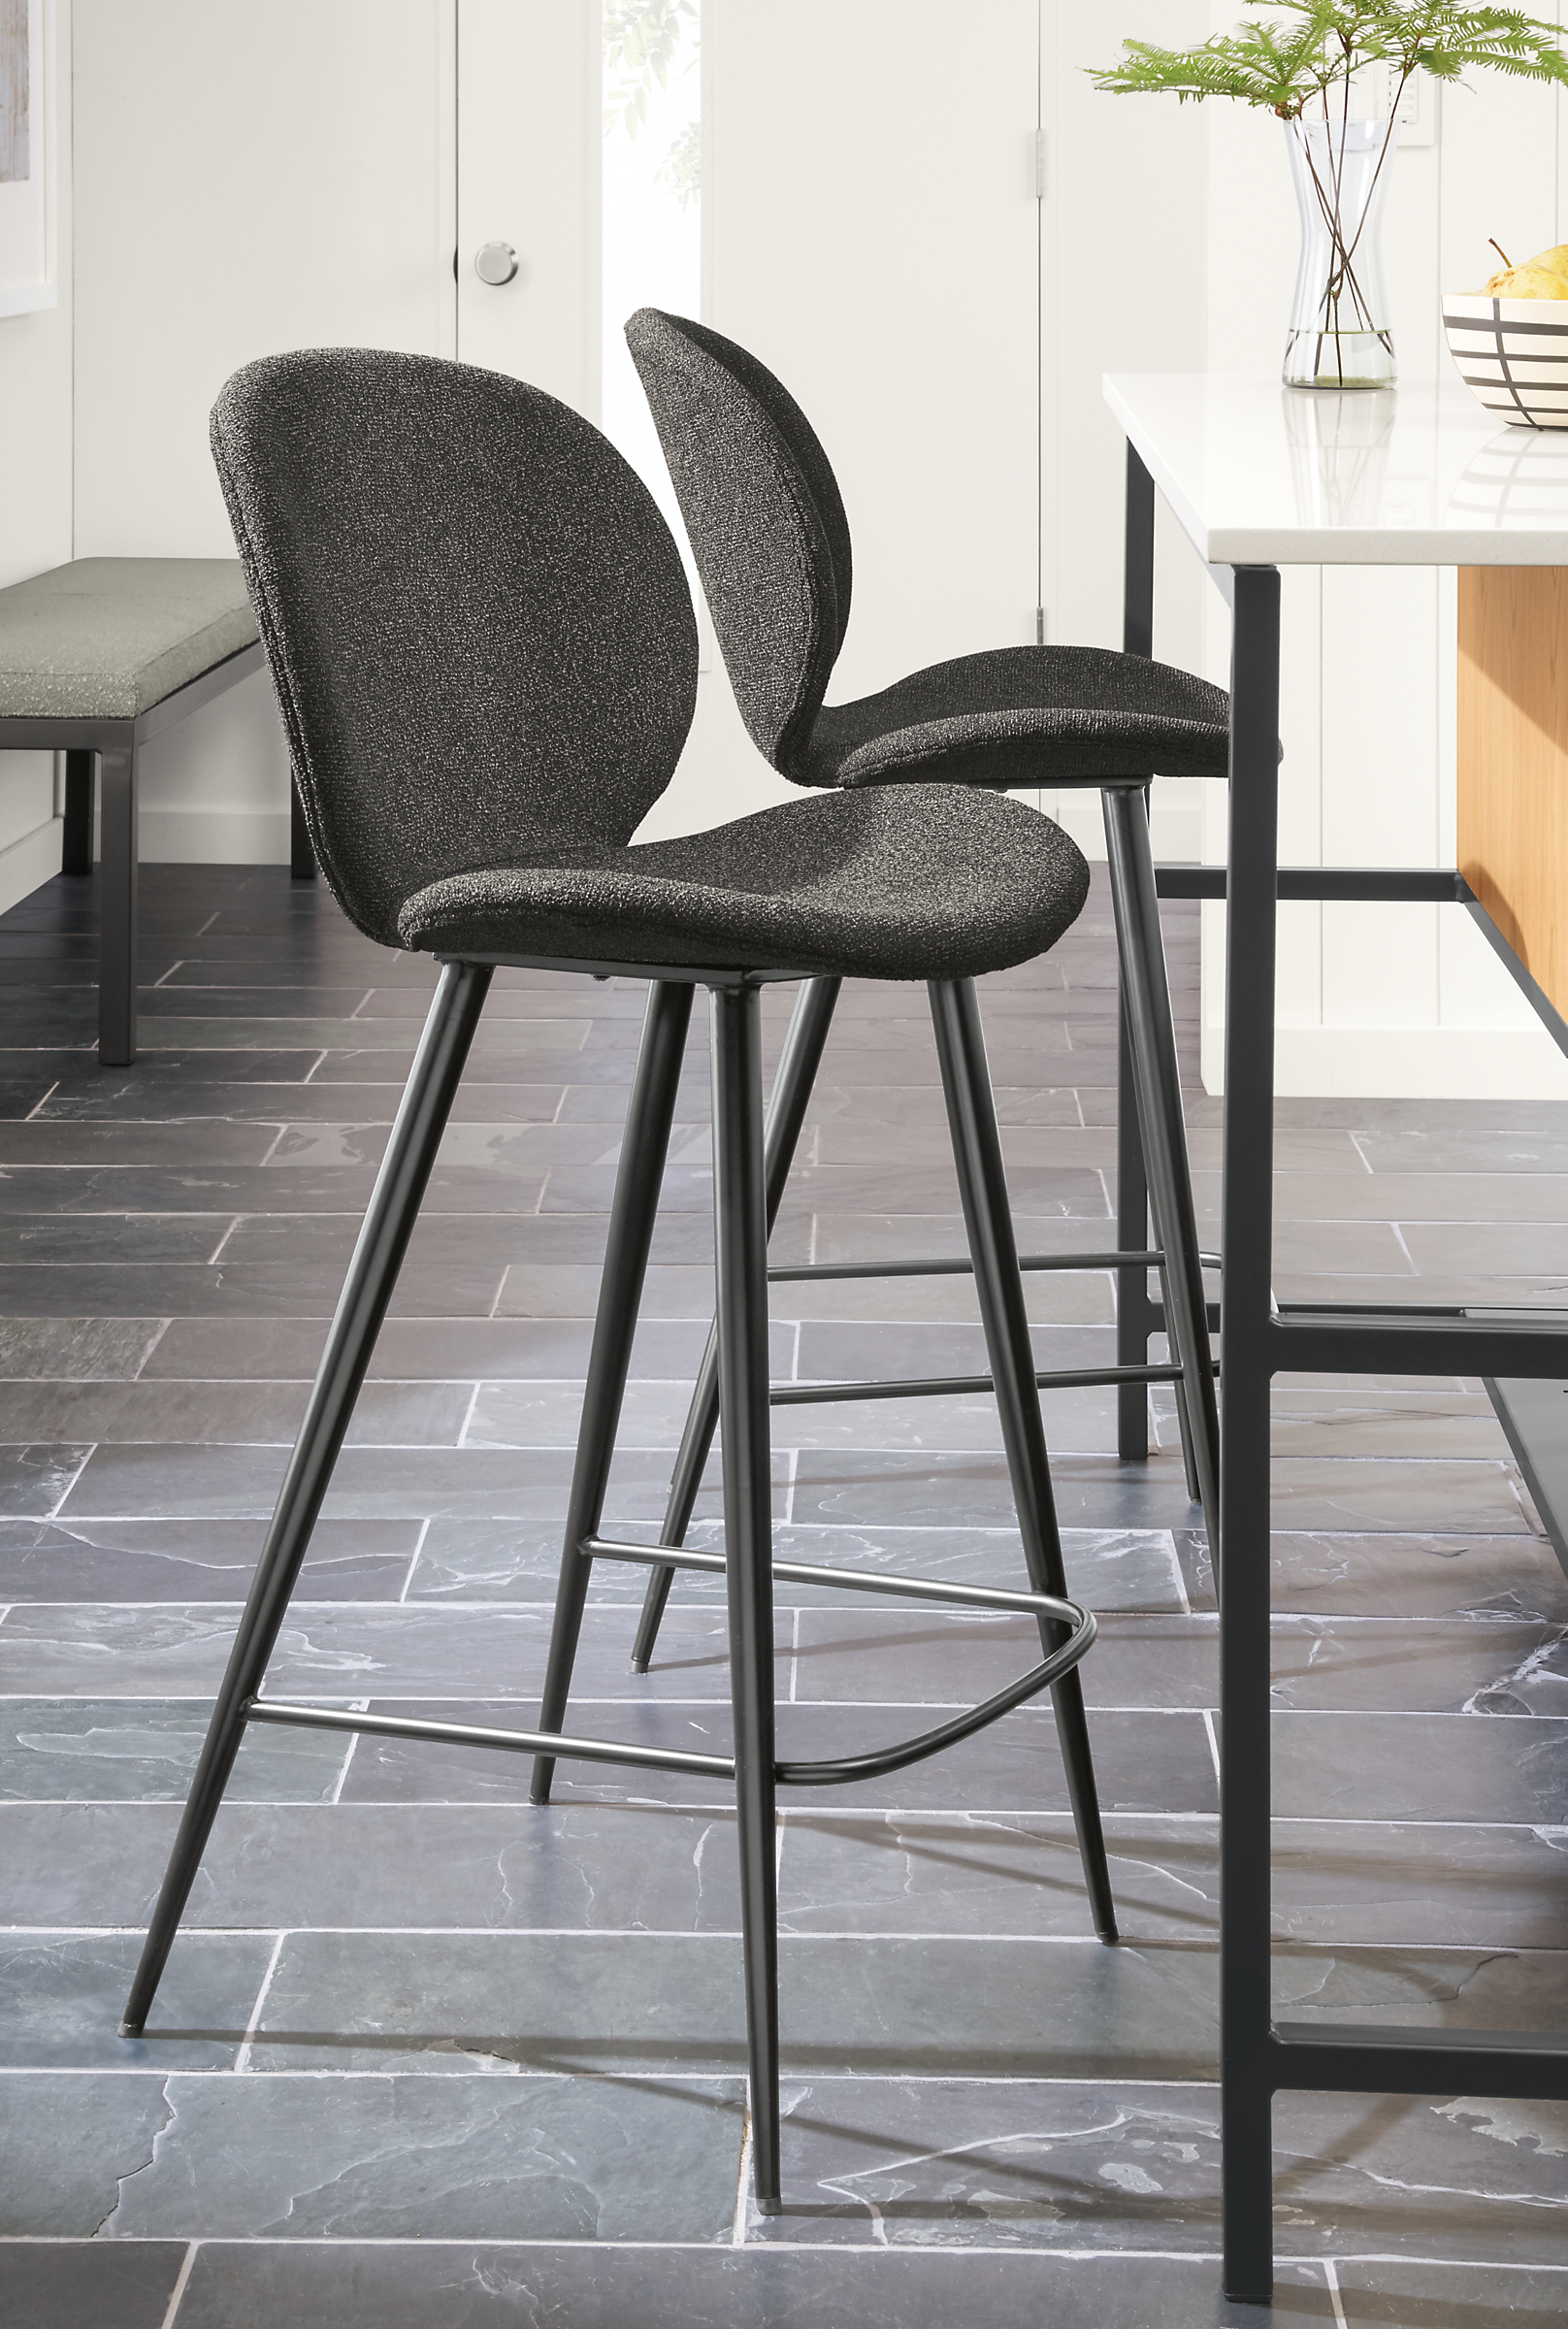 Detail of 2 Gwen counter stools in Radford Grey fabric set at Booker kitchen island.